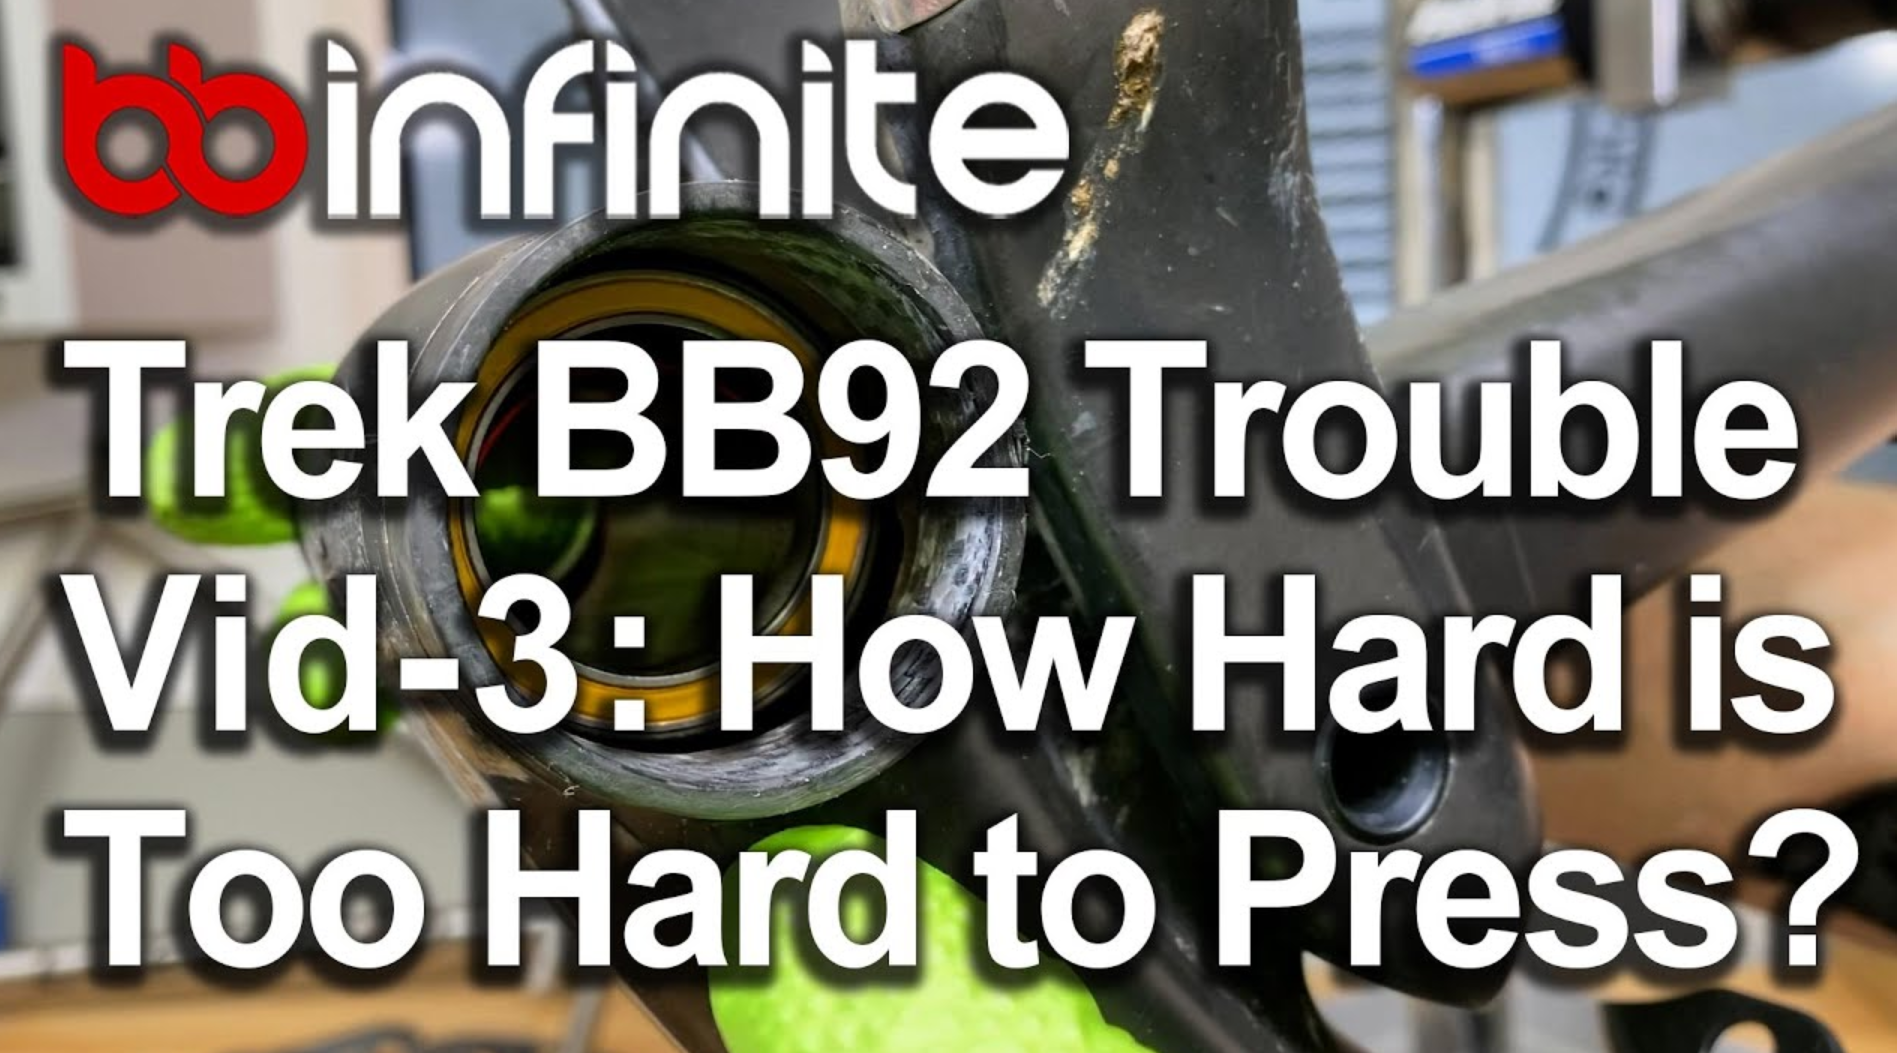 Trek BB92 Trouble Part 3: How Hard is Too Hard To Press?